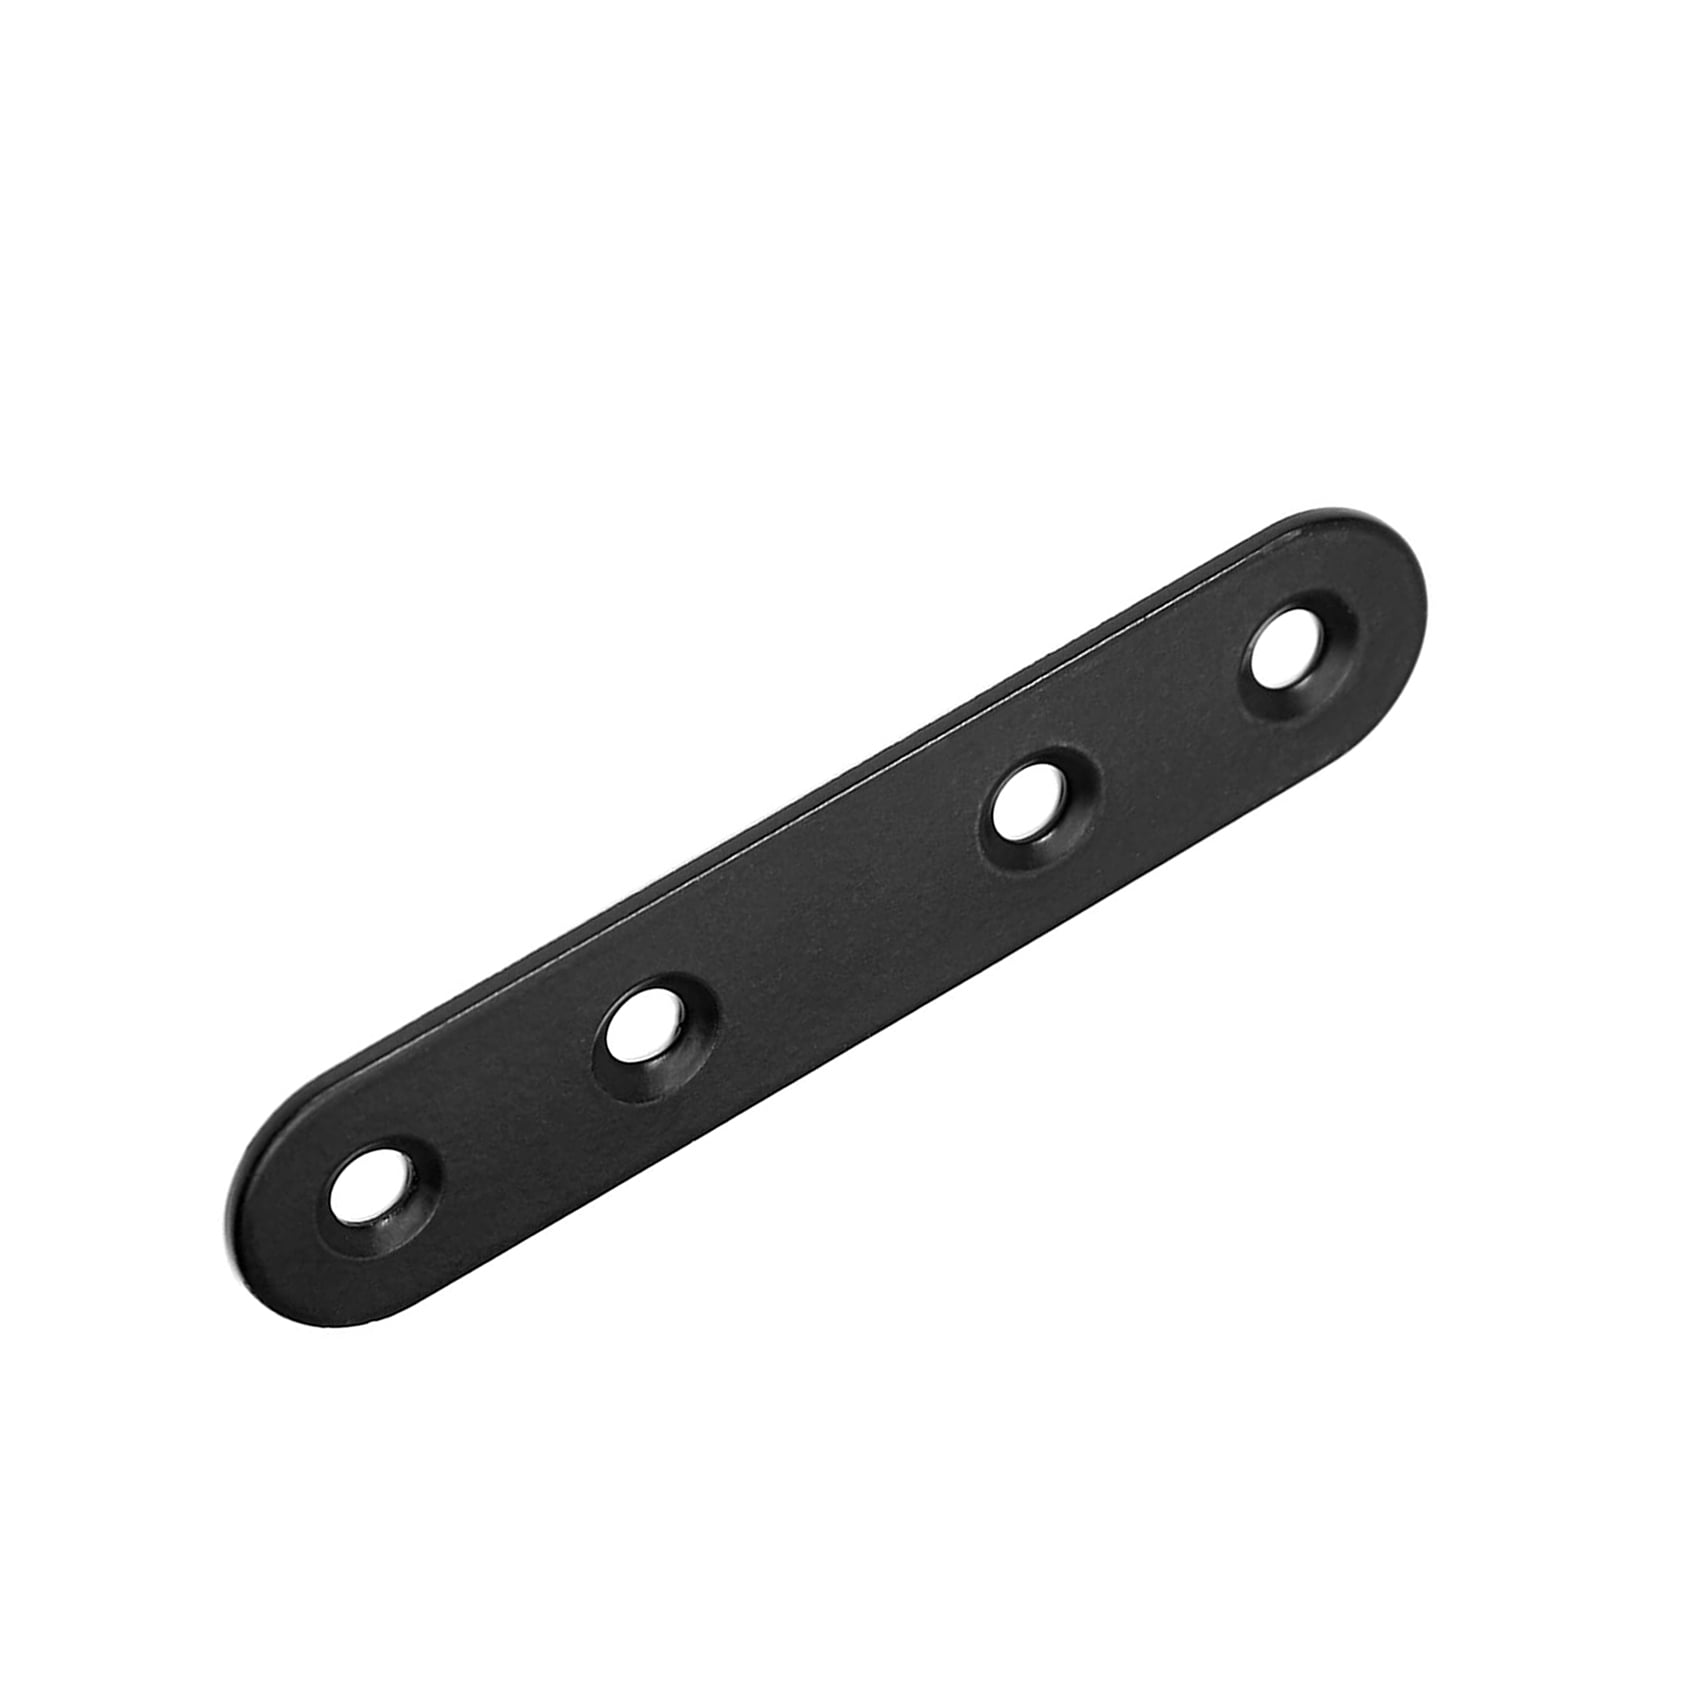 1.5”Wide Iron Mending Plate for Wood Furniture 12PCS Flat Straight Brace Metal Joining Plate Repairing Fastener for Table Bed Bookshelves Cabinet 6.7” Heavy Duty Black Straight Bracket 